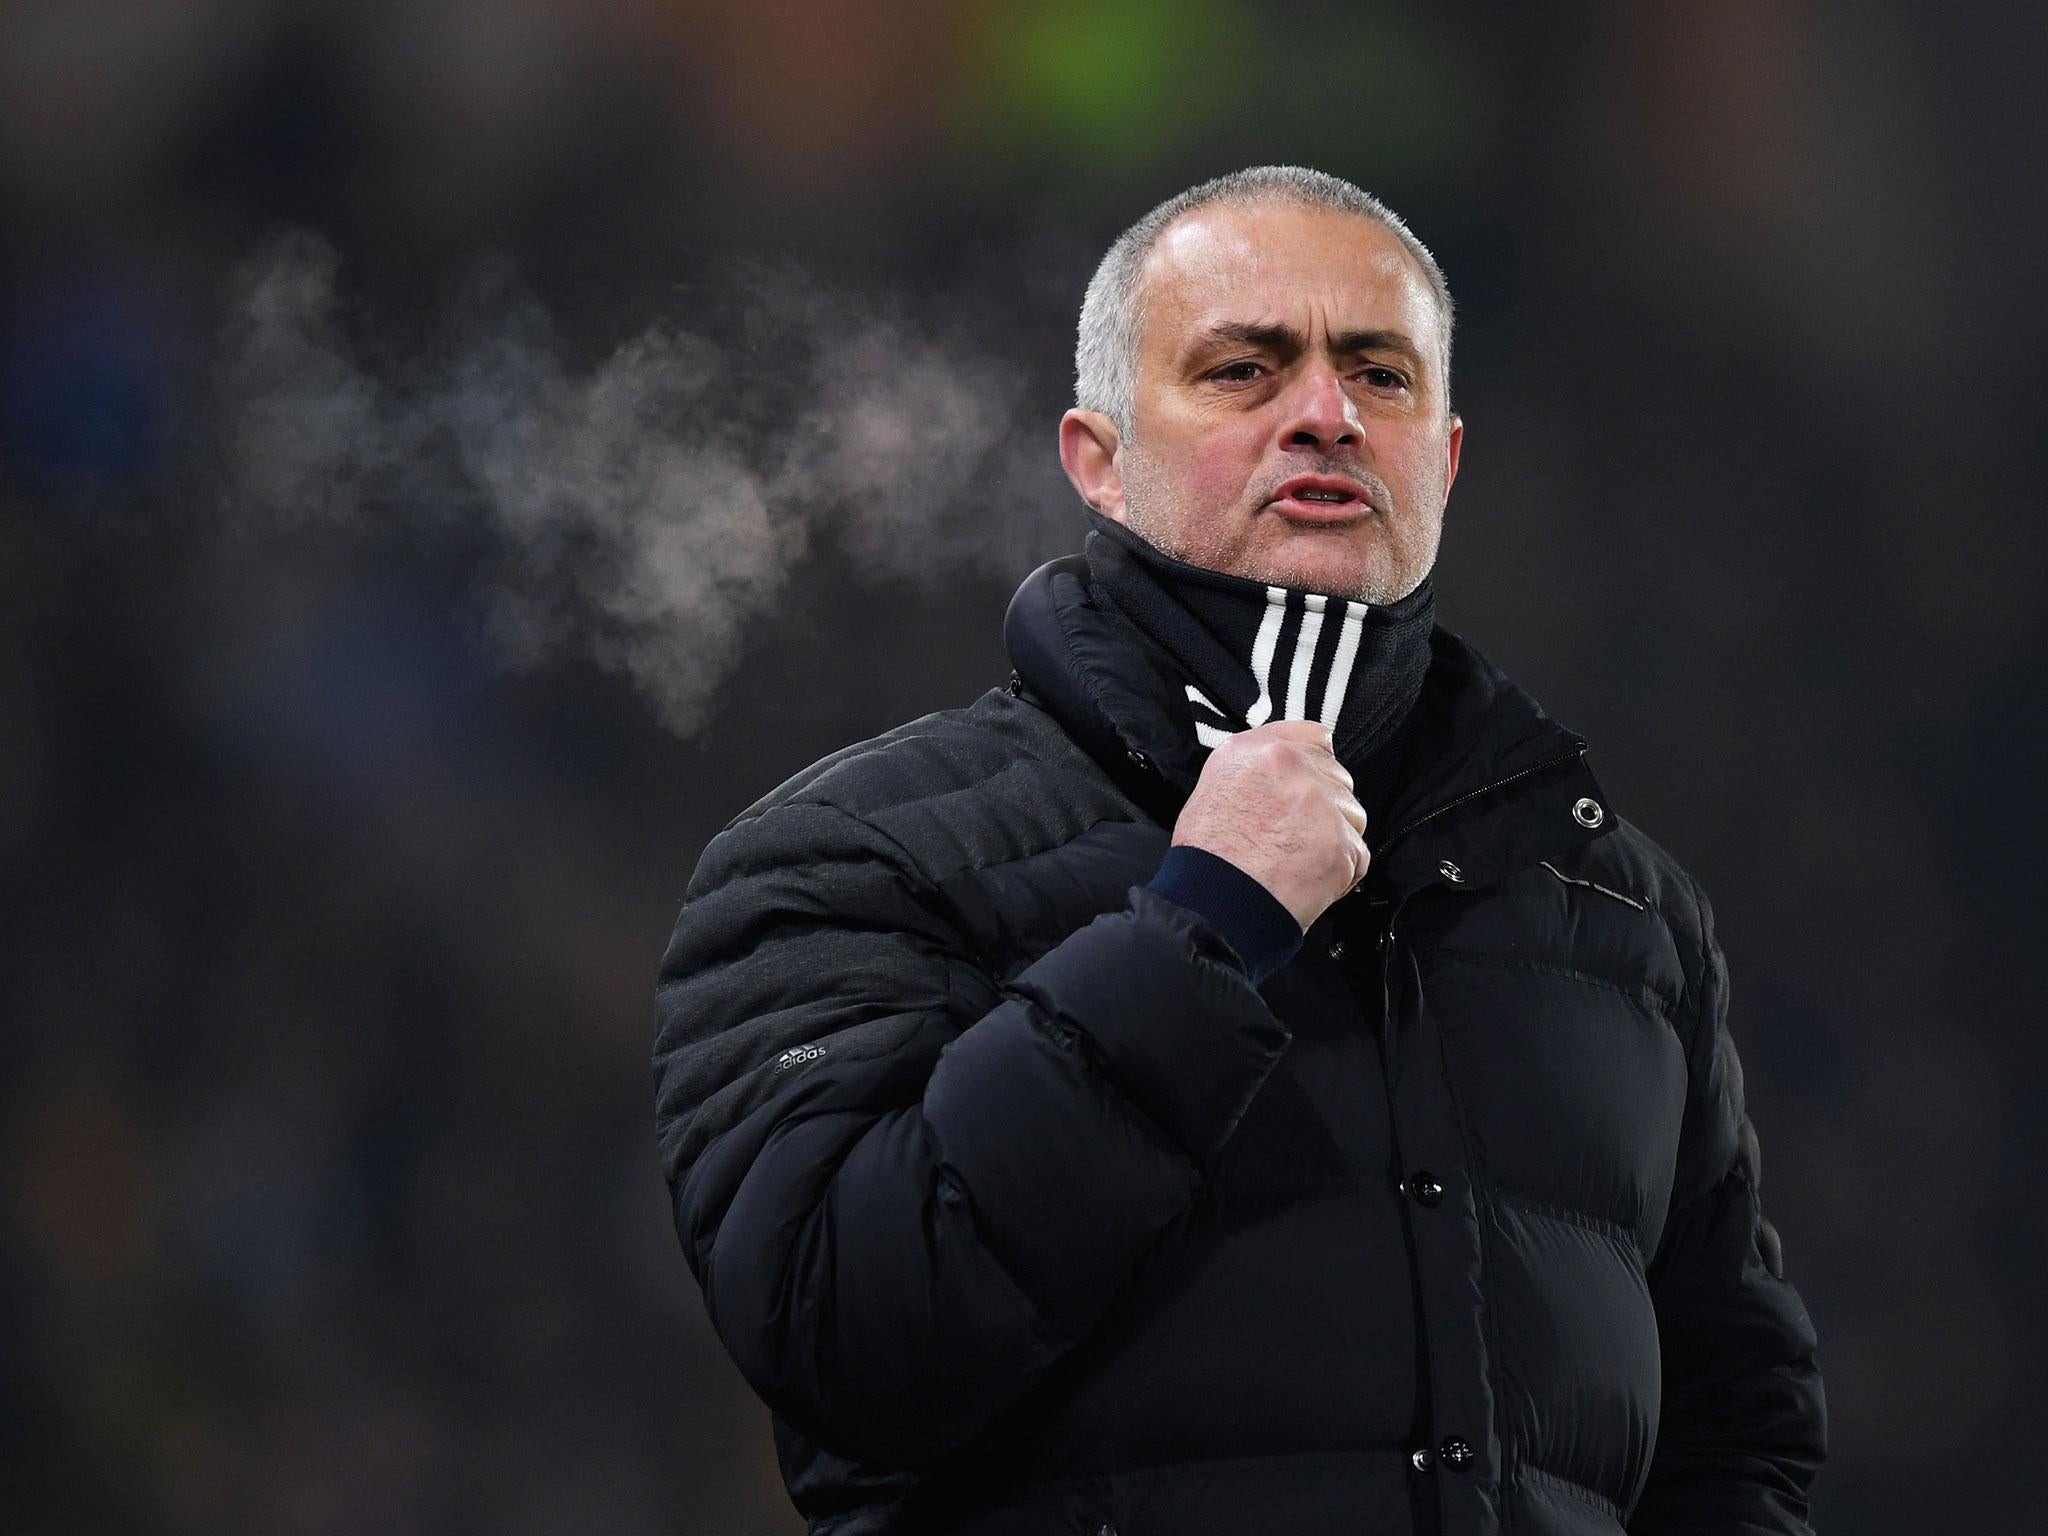 Jose Mourinho has made his feelings about United's busy schedule this season abundantly clear